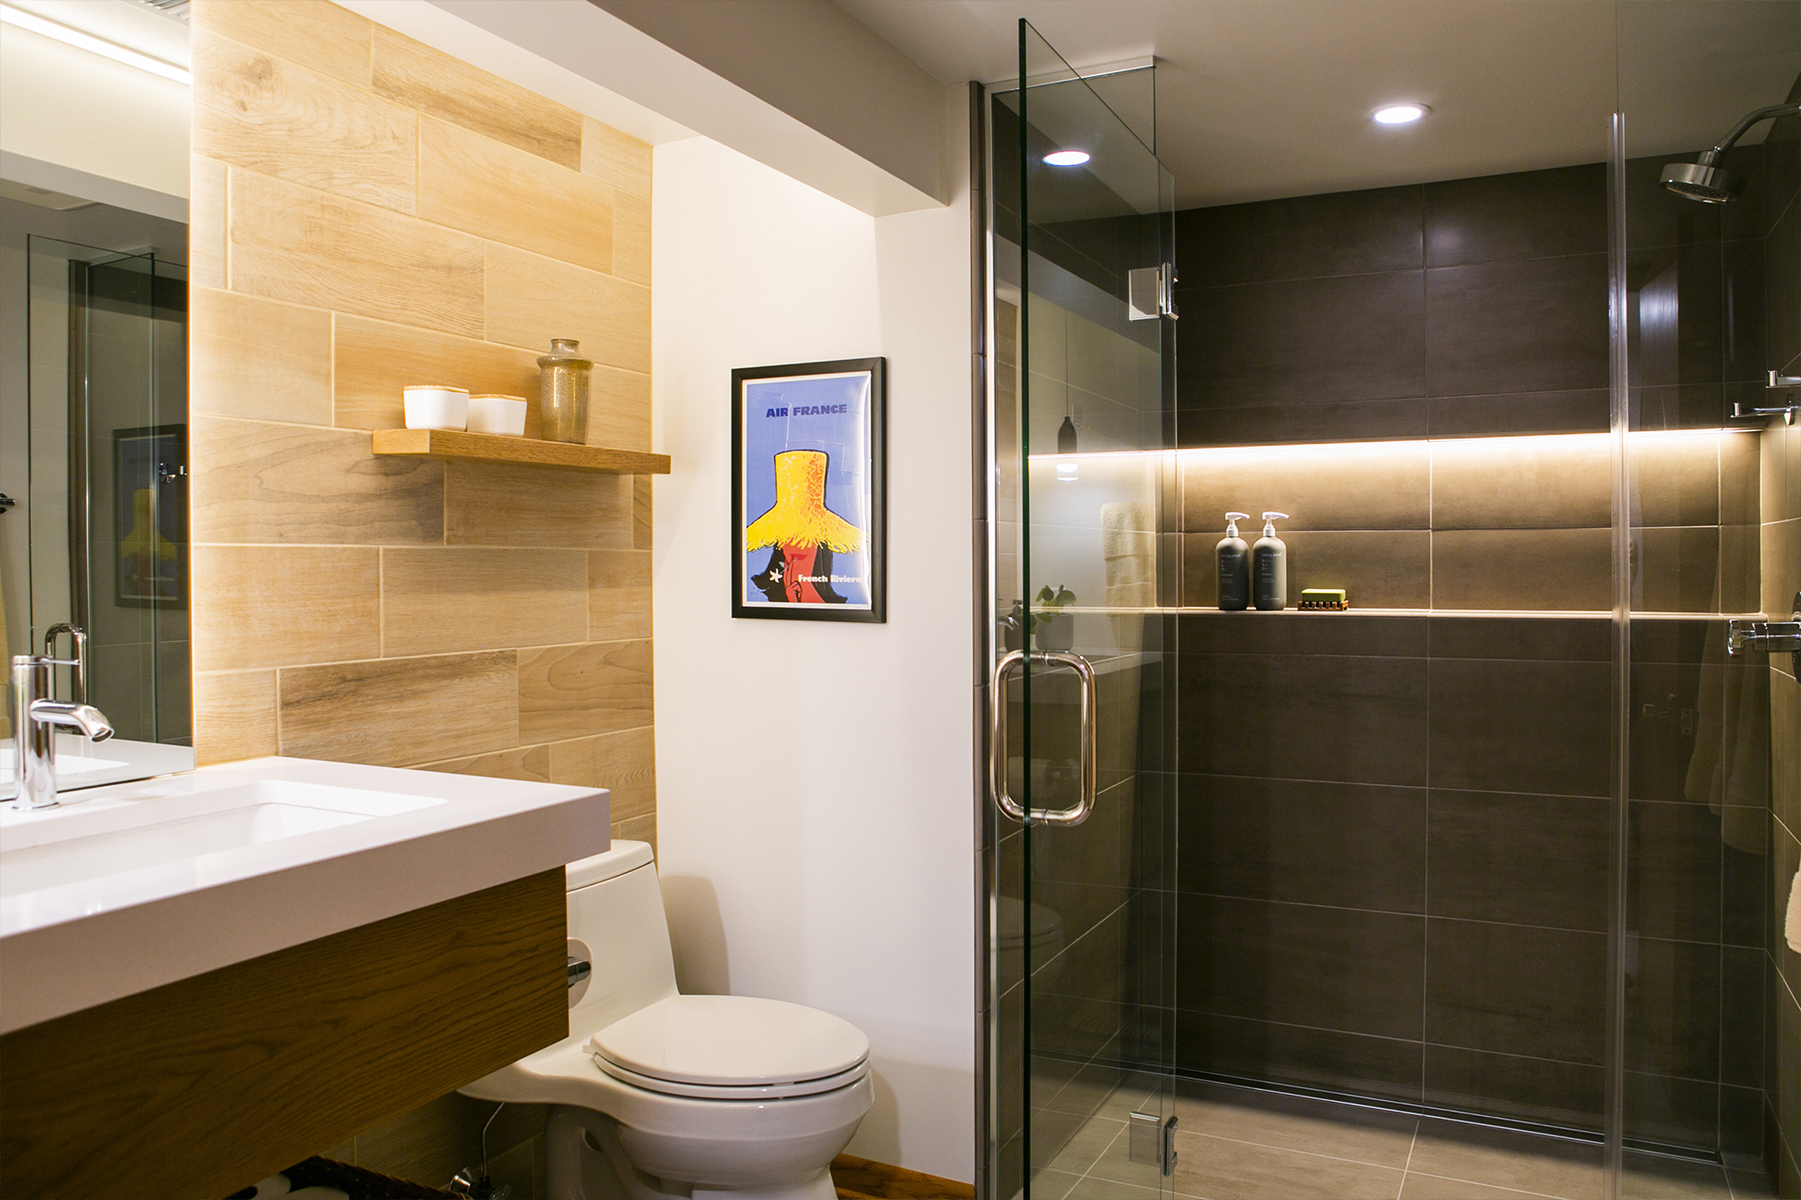 A full color image of a luxurious full bathroom with sink, toilet and tiled shower.